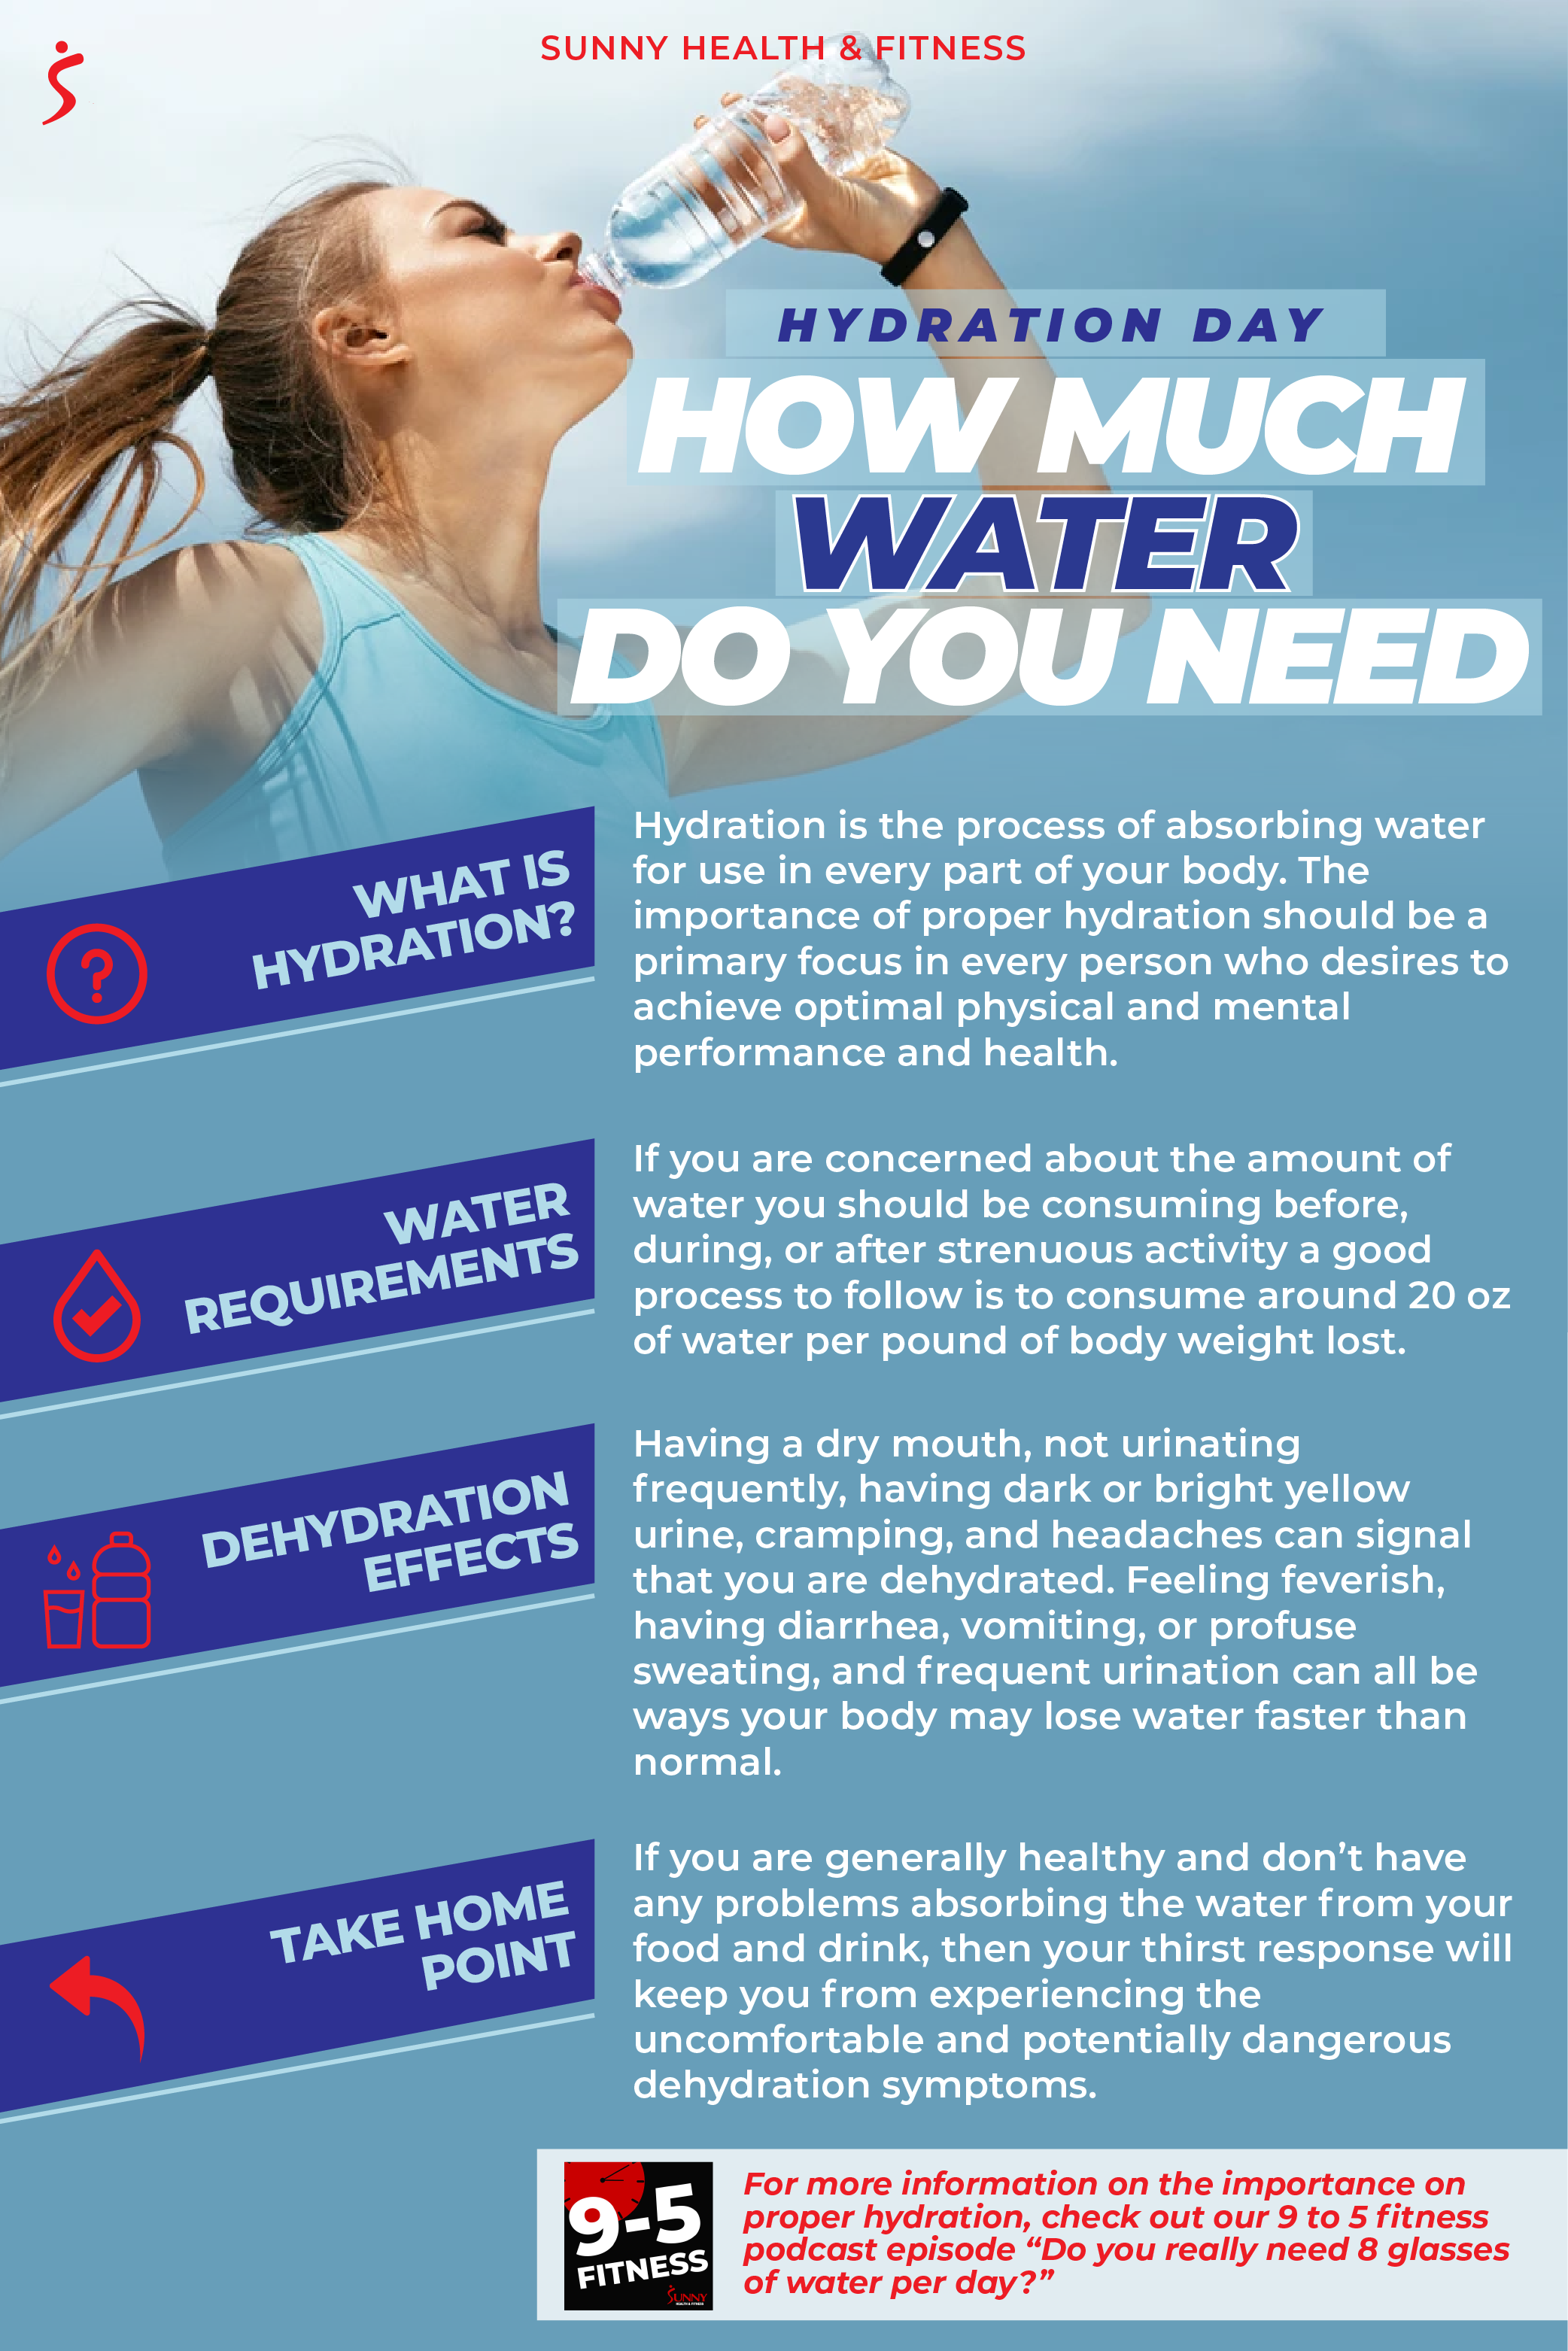 https://cdn.shopify.com/s/files/1/0052/7043/7978/t/4/assets/hydration-how-much-water-you-need-infographic.png